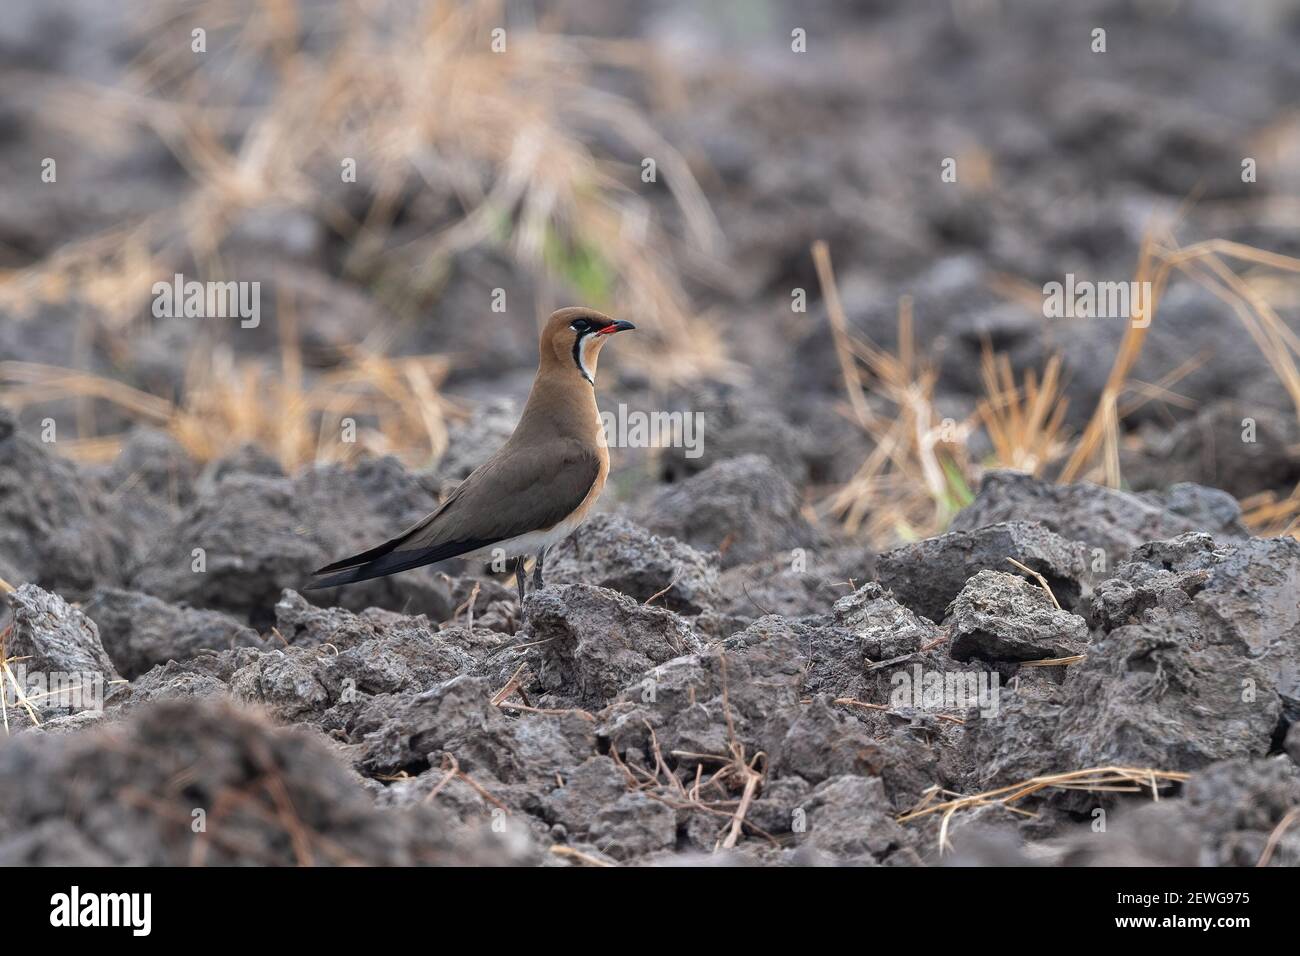 The oriental pratincole (Glareola maldivarum), also known as the grasshopper-bird or swallow-plover, is a wader in the pratincole family, Glareolidae. Stock Photo